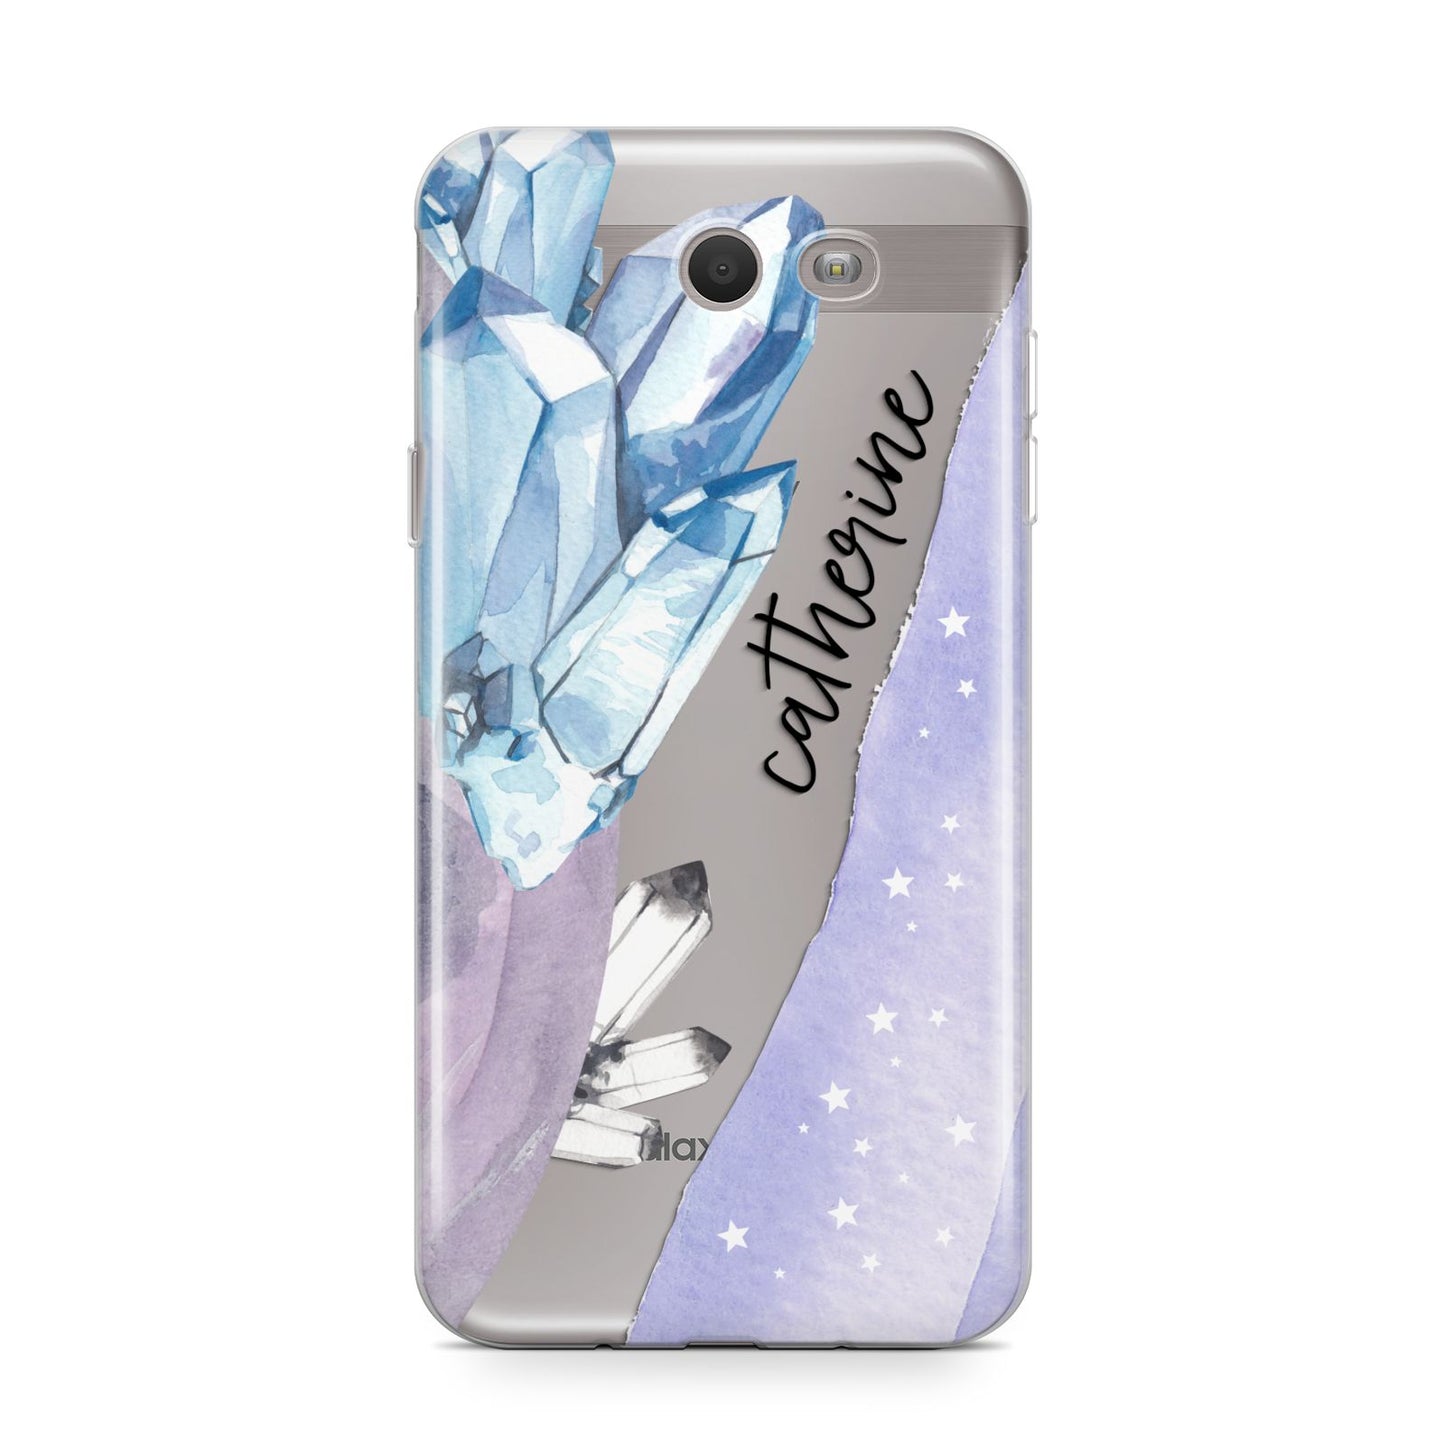 Crystals Personalised Name Samsung Galaxy J7 2017 Case